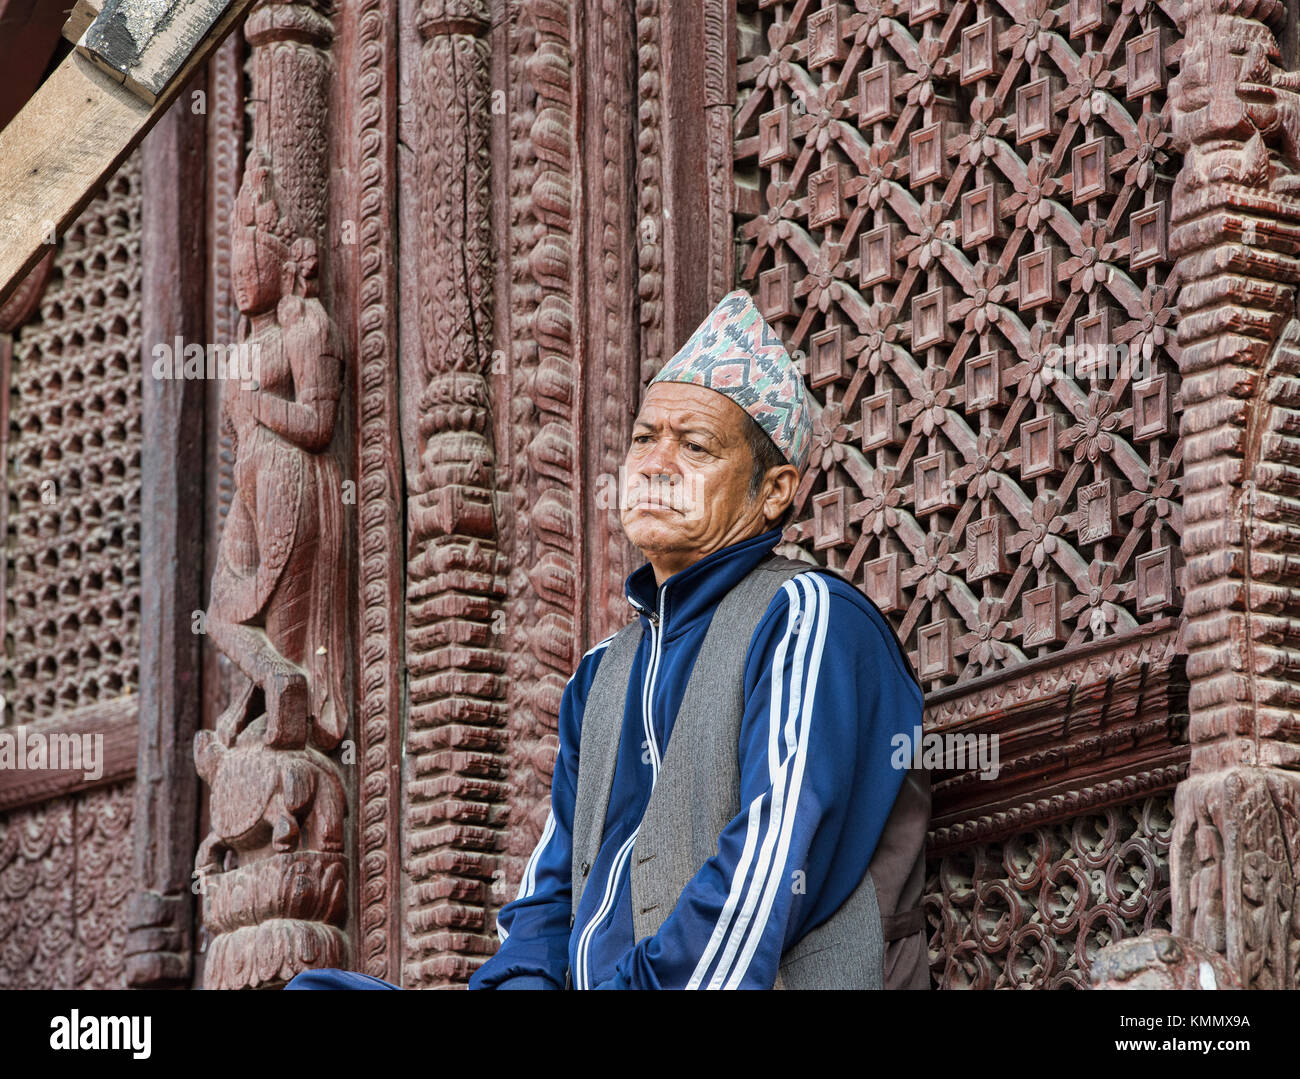 Sitting in reflection at a temple in Durbar Square, Kathmandu, Nepal Stock Photo